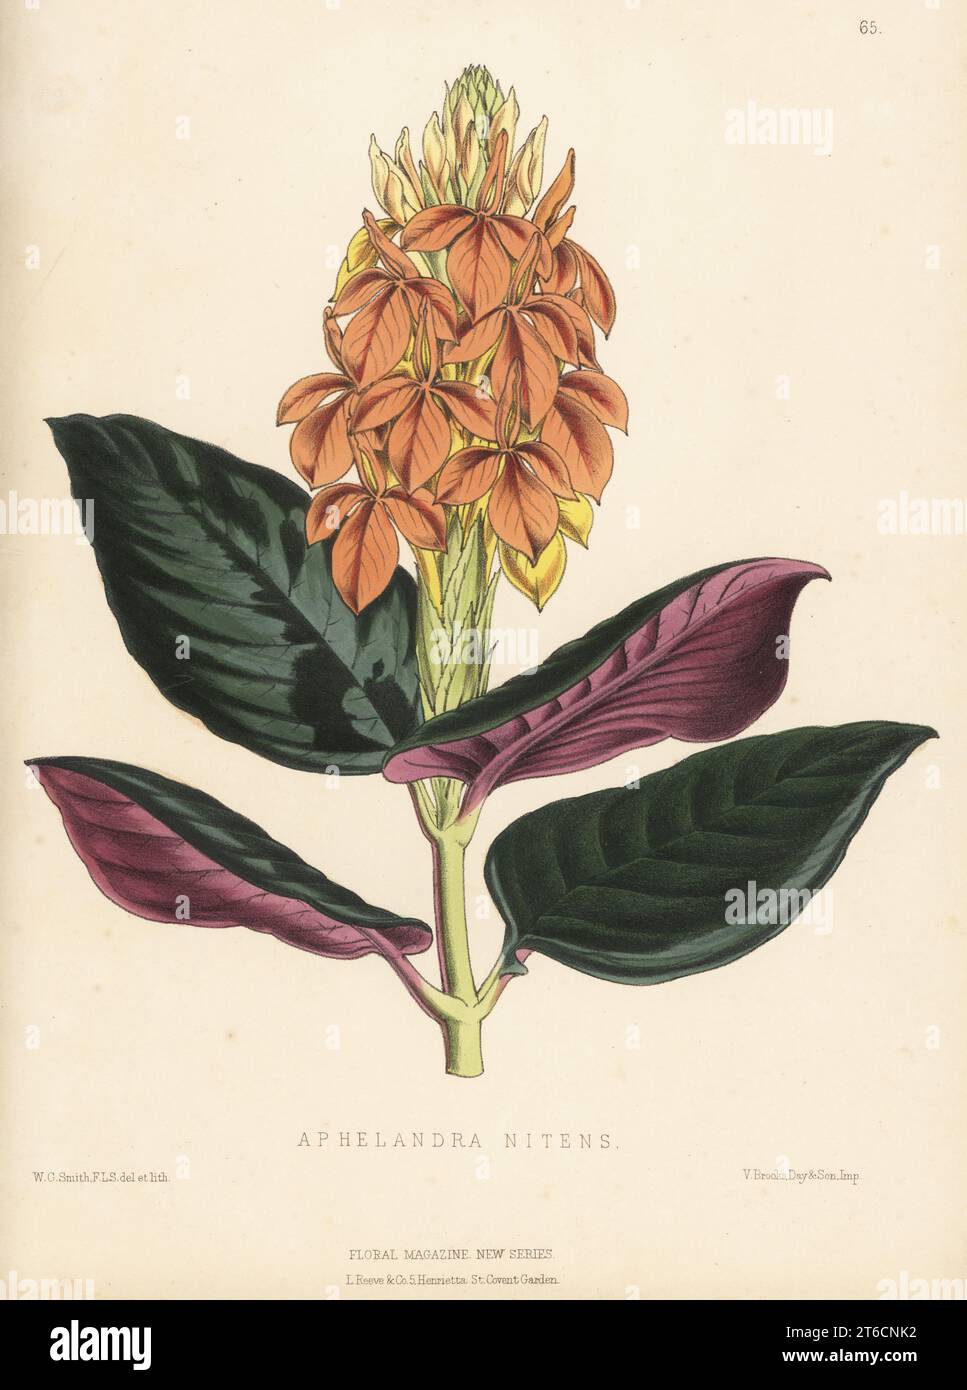 Aphelandra aurantiaca var. nitens, native to the tropical Americas. As Aphelandra nitens, imported from Guayaquil by Veitch and Sons of Chelsea. Handcolored botanical illustration drawn and lithographed by Worthington George Smith from Henry Honywood Dombrain's Floral Magazine, New Series, Volume 2, L. Reeve, London, 1873. Lithograph printed by Vincent Brooks, Day & Son. Stock Photo